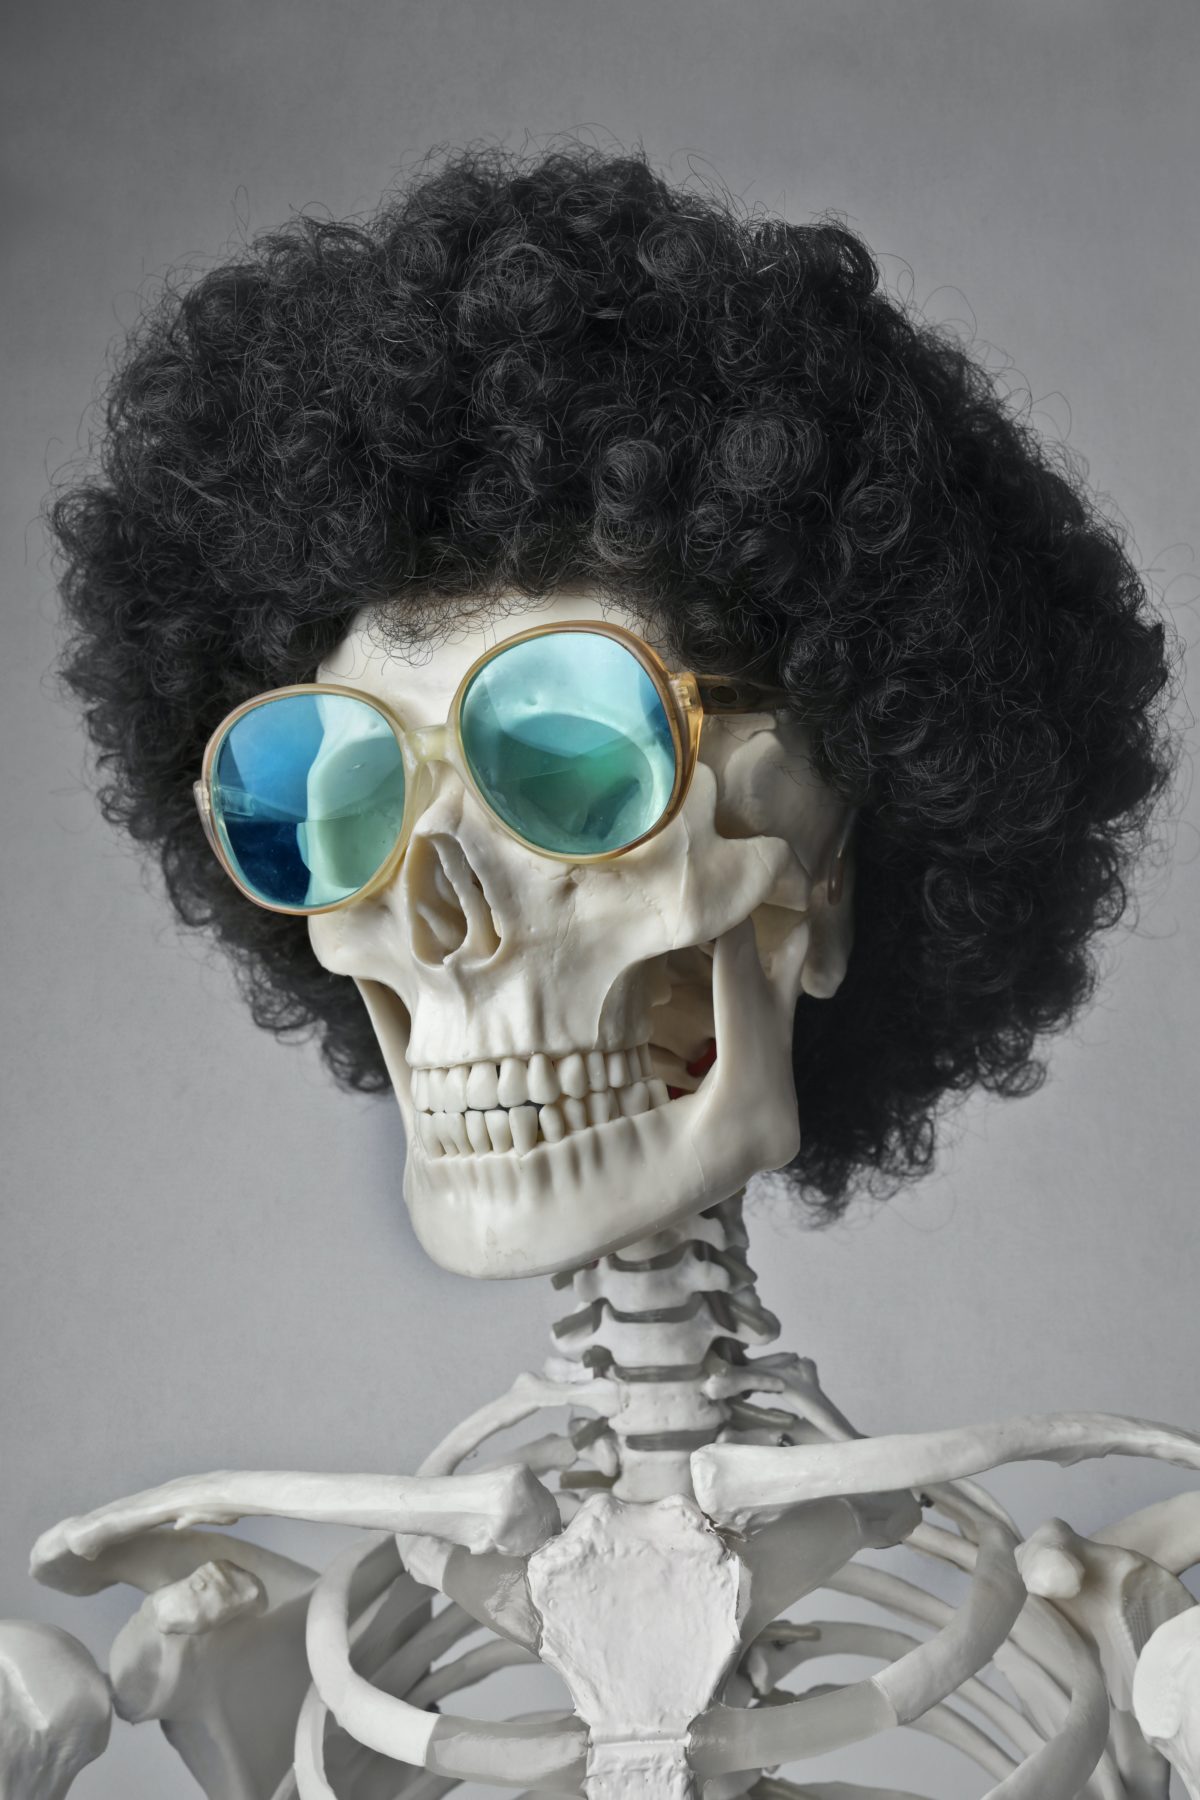 A skeleton wearing a wig and sunglasses.